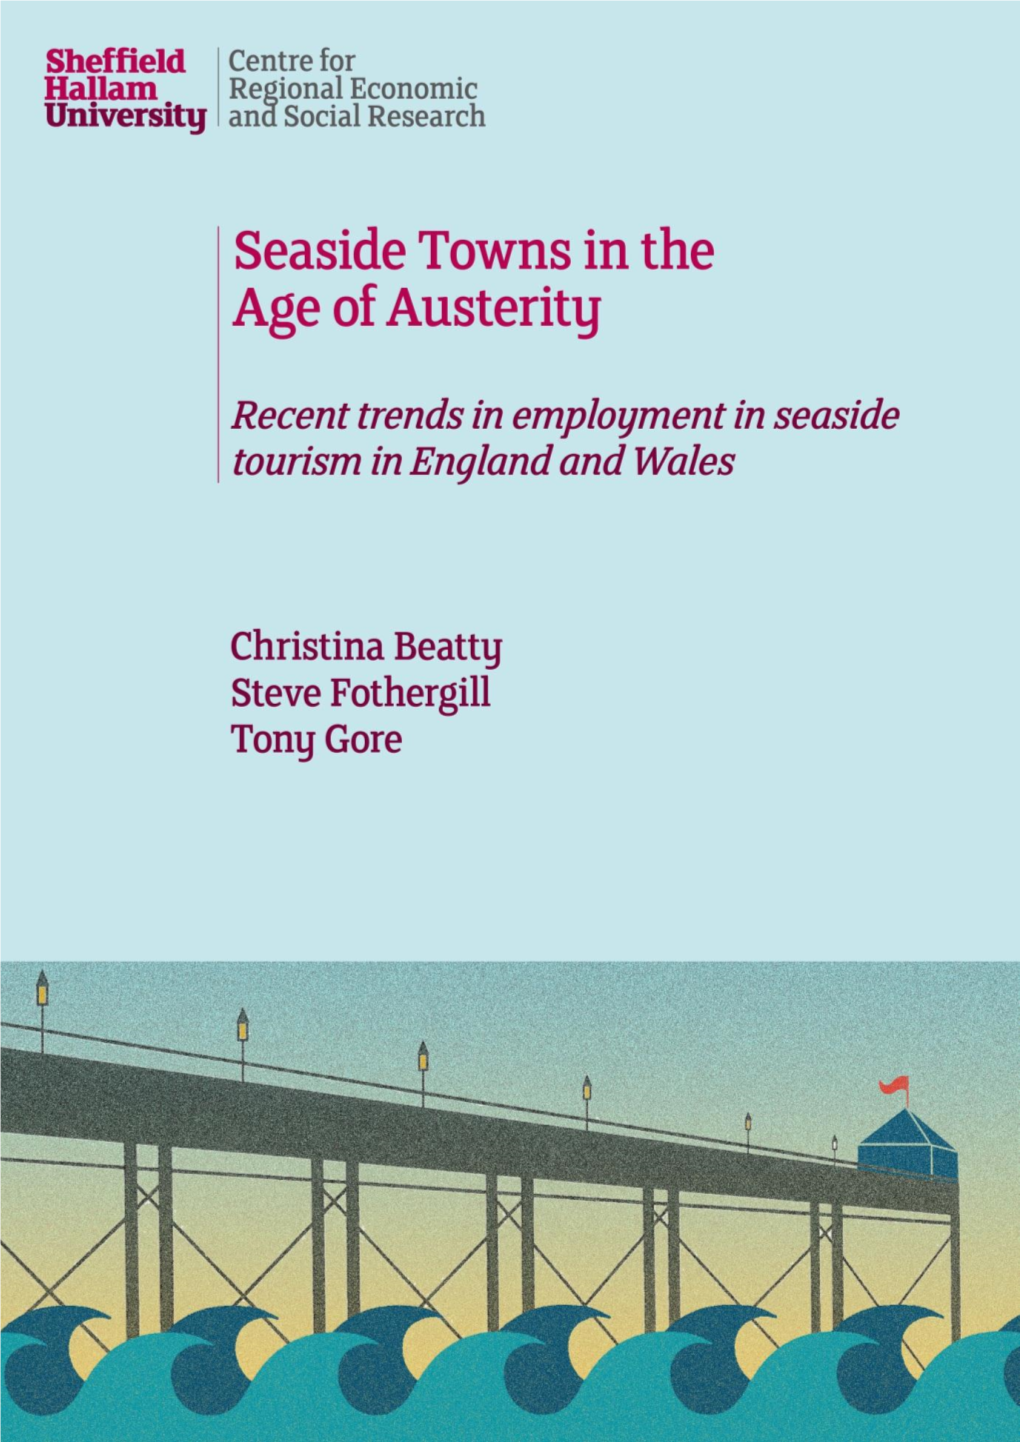 Seaside Towns in the Age of Austerity – Recent Trends in Employment